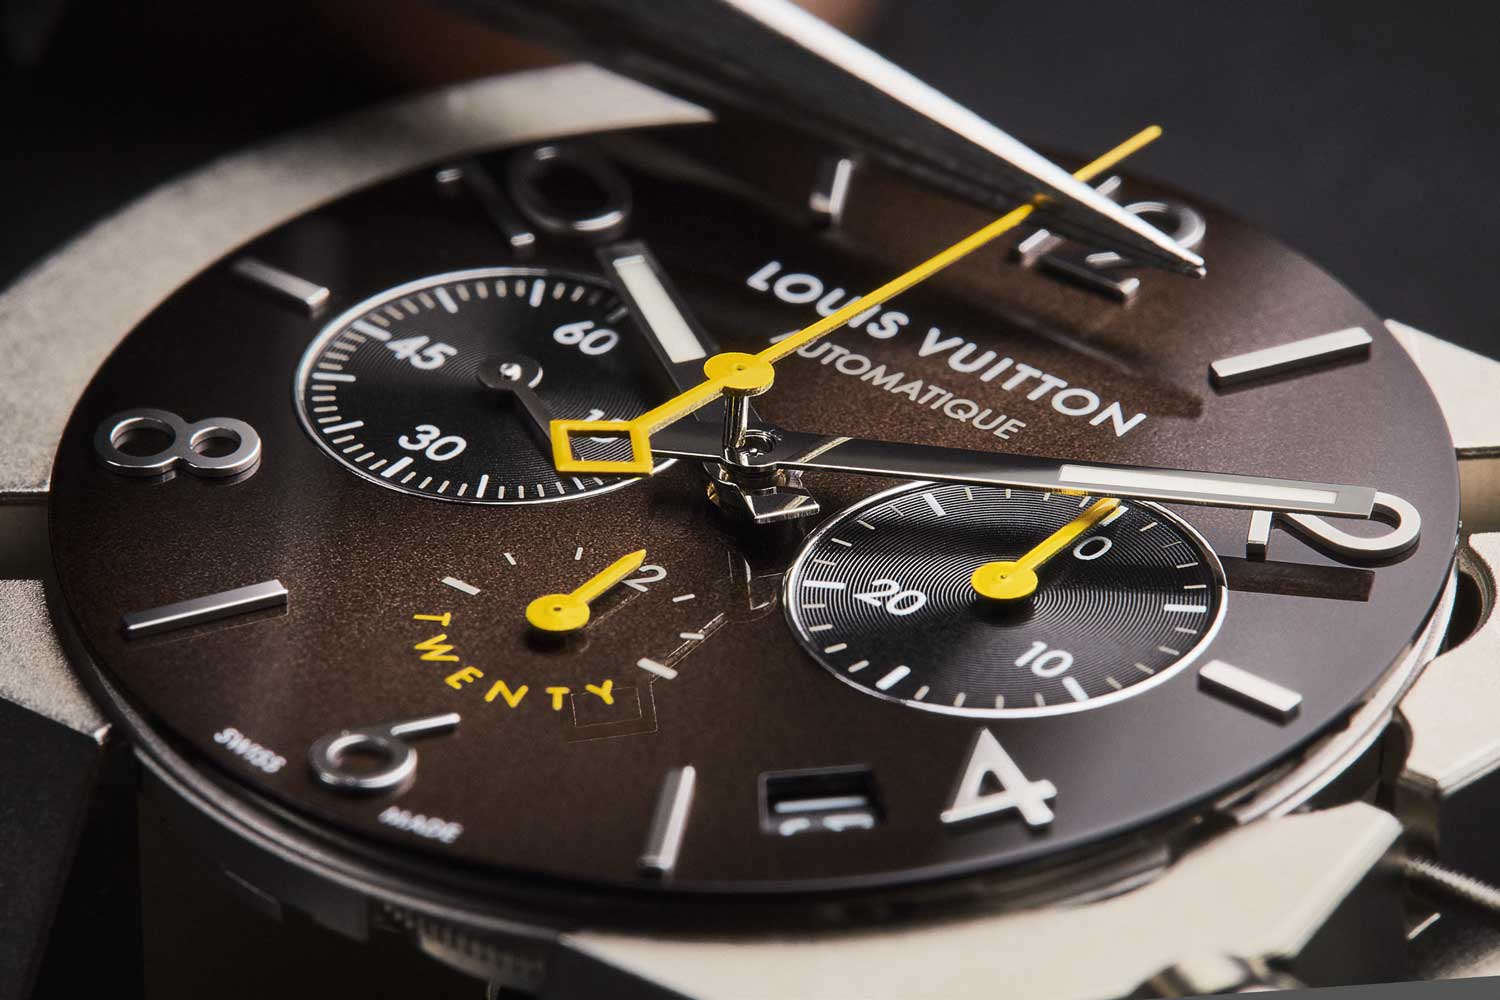 Tambout Twenty features a brown sun-brushed dial, along which the chronograph’s long yellow hand glides - a nod to the thread historically used in leatherwork